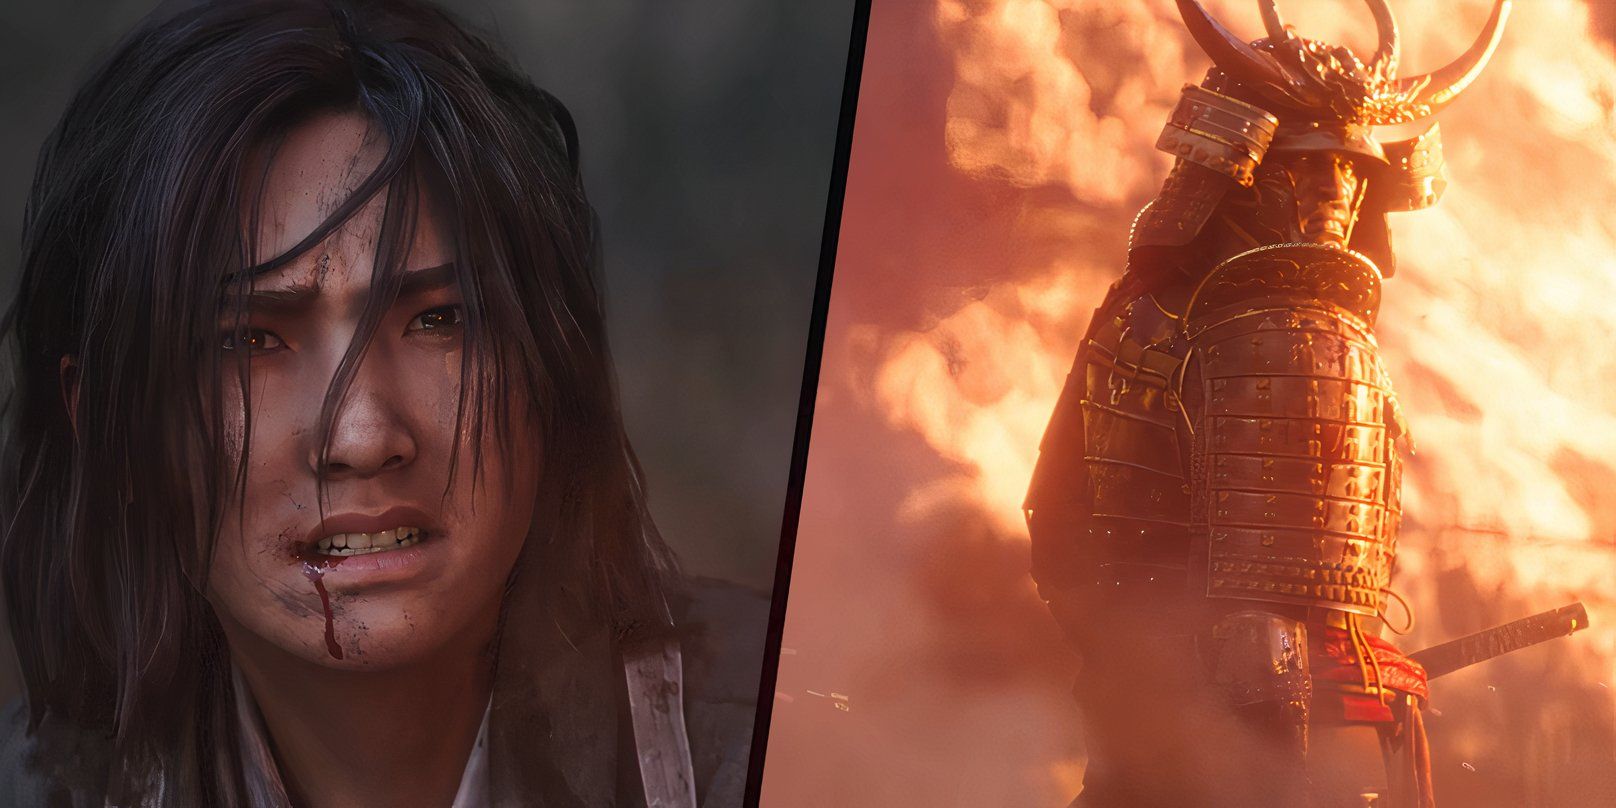 A split-screen image shows Naoe crying and gritting her teeth while a fully armoed Yasuke looks over his shoulder, surrounded by flames, in screenshots from the Assassin's Creed Shadows trailer.